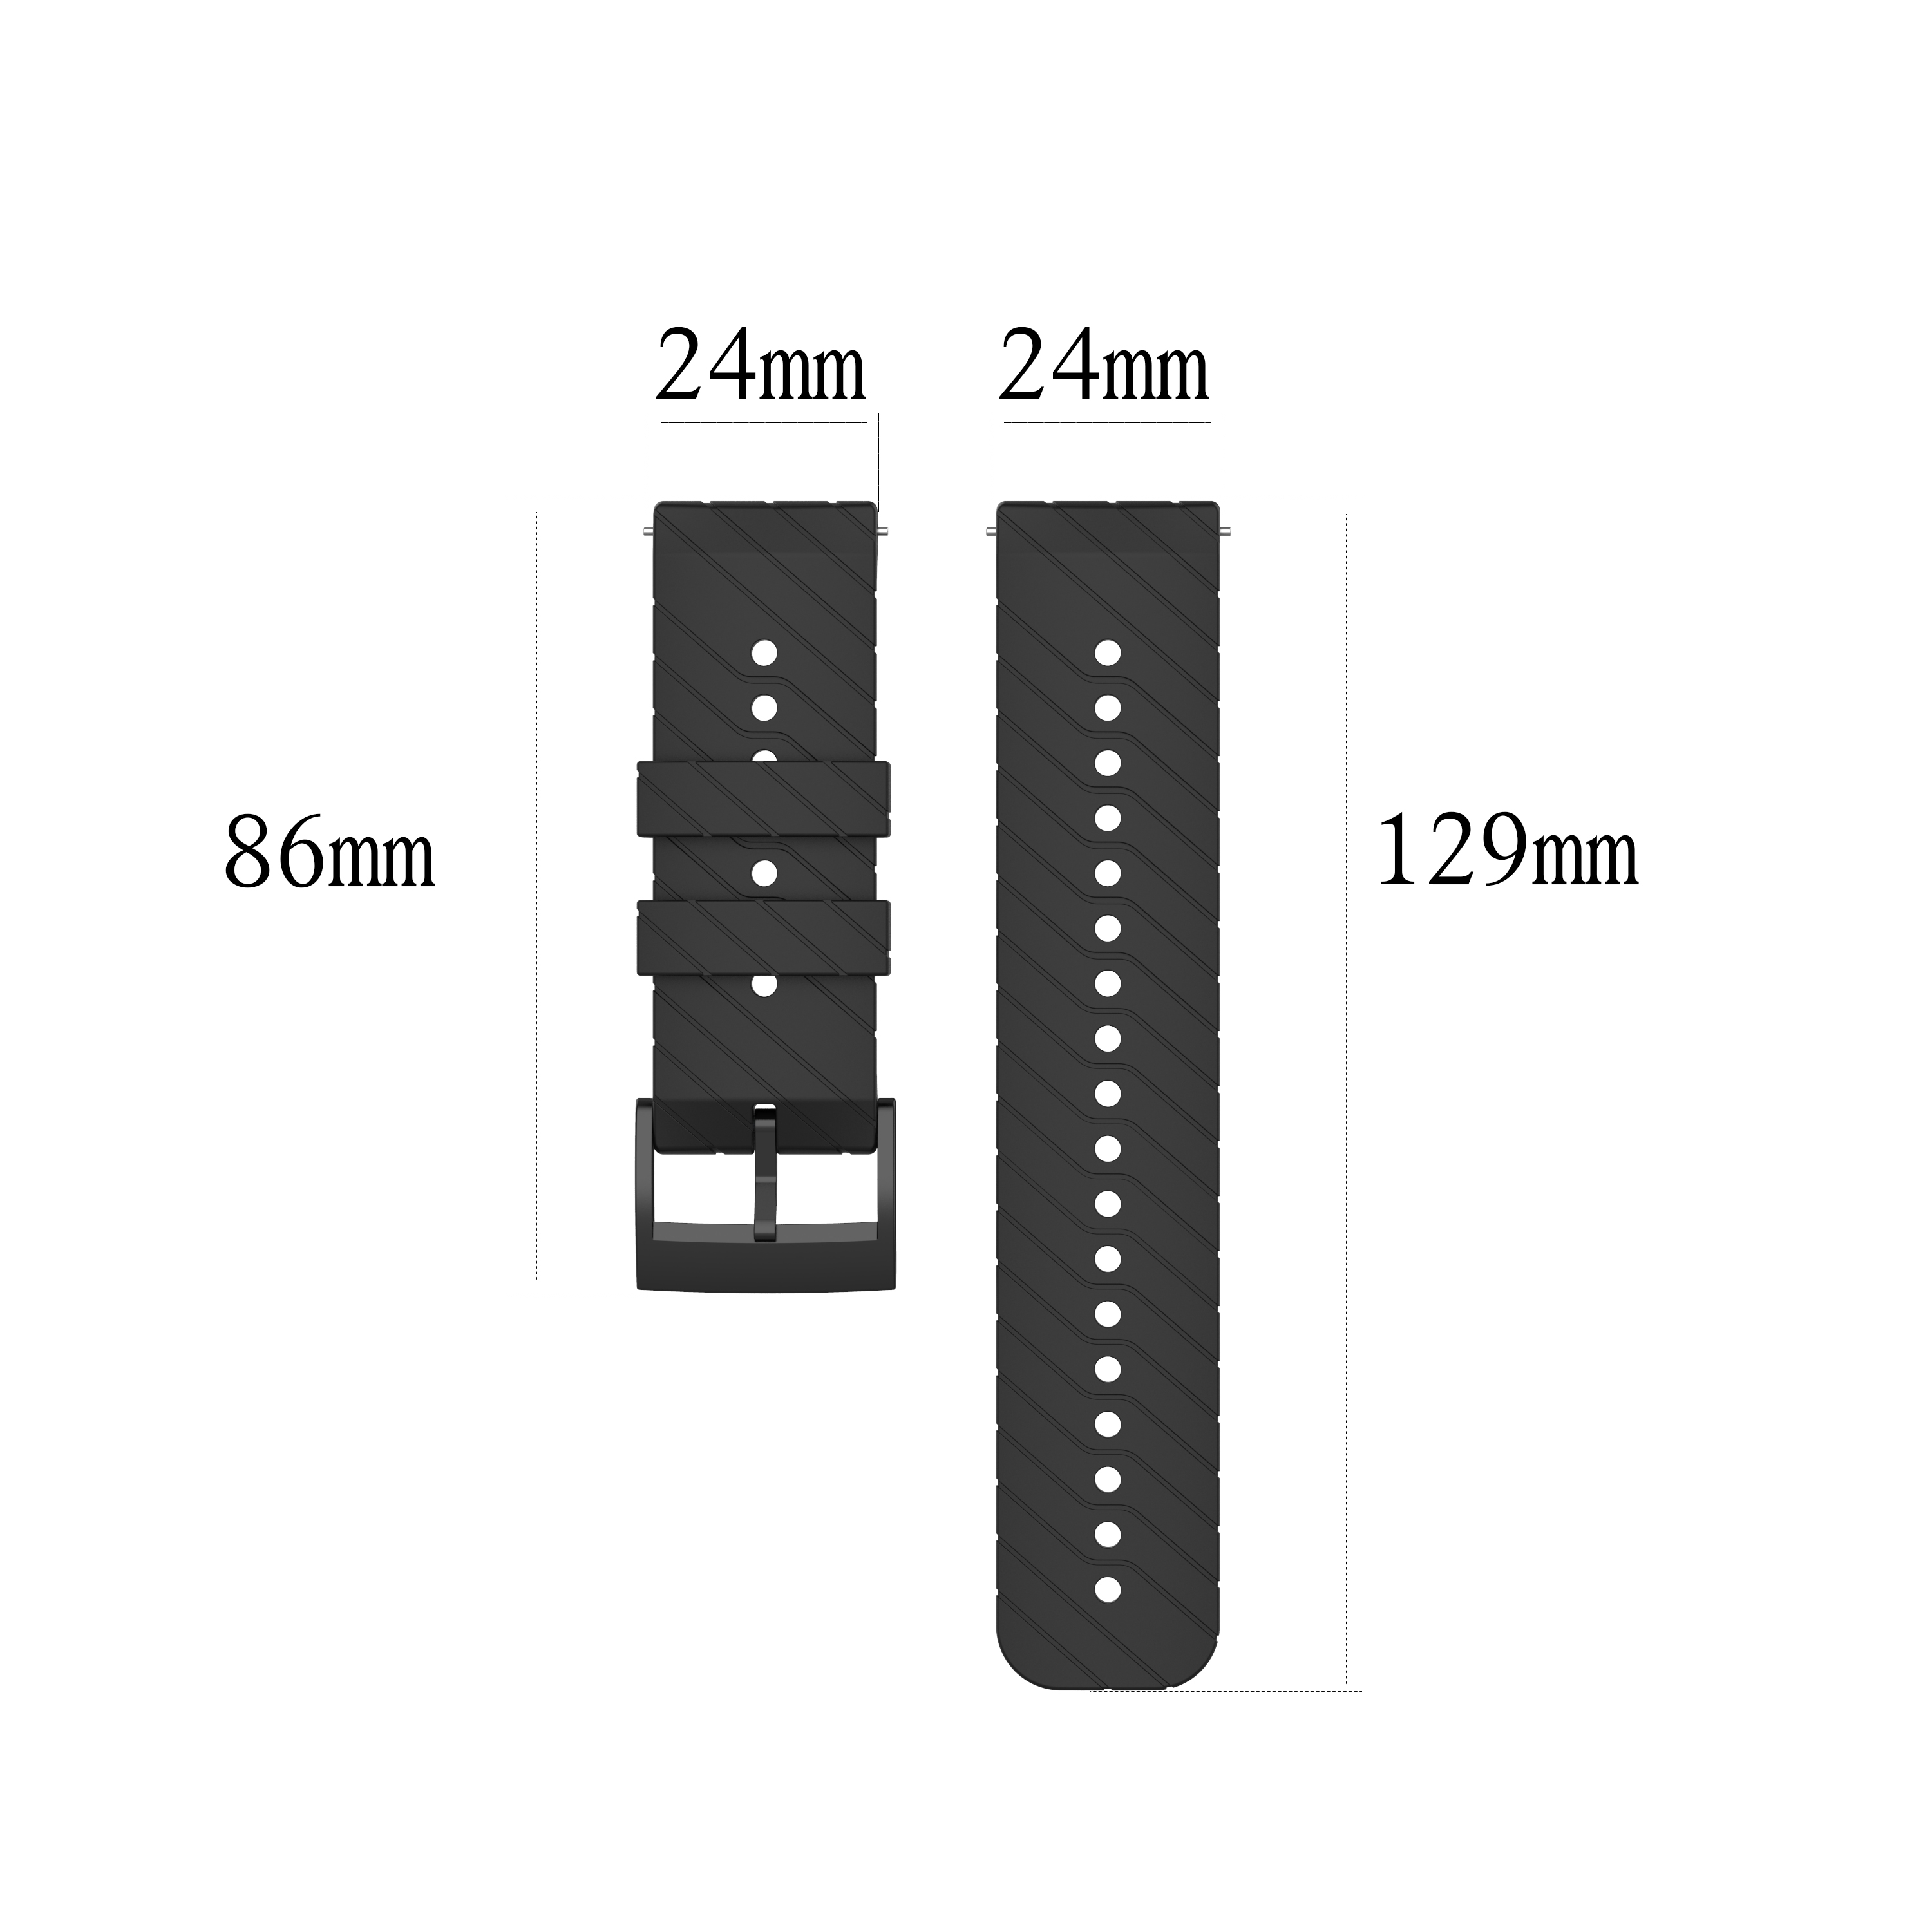 Bakeey-24mm-Twill-Silicone-Replacement-Strap-Smart-Watch-Band-for-Sunnto-9-1751337-3